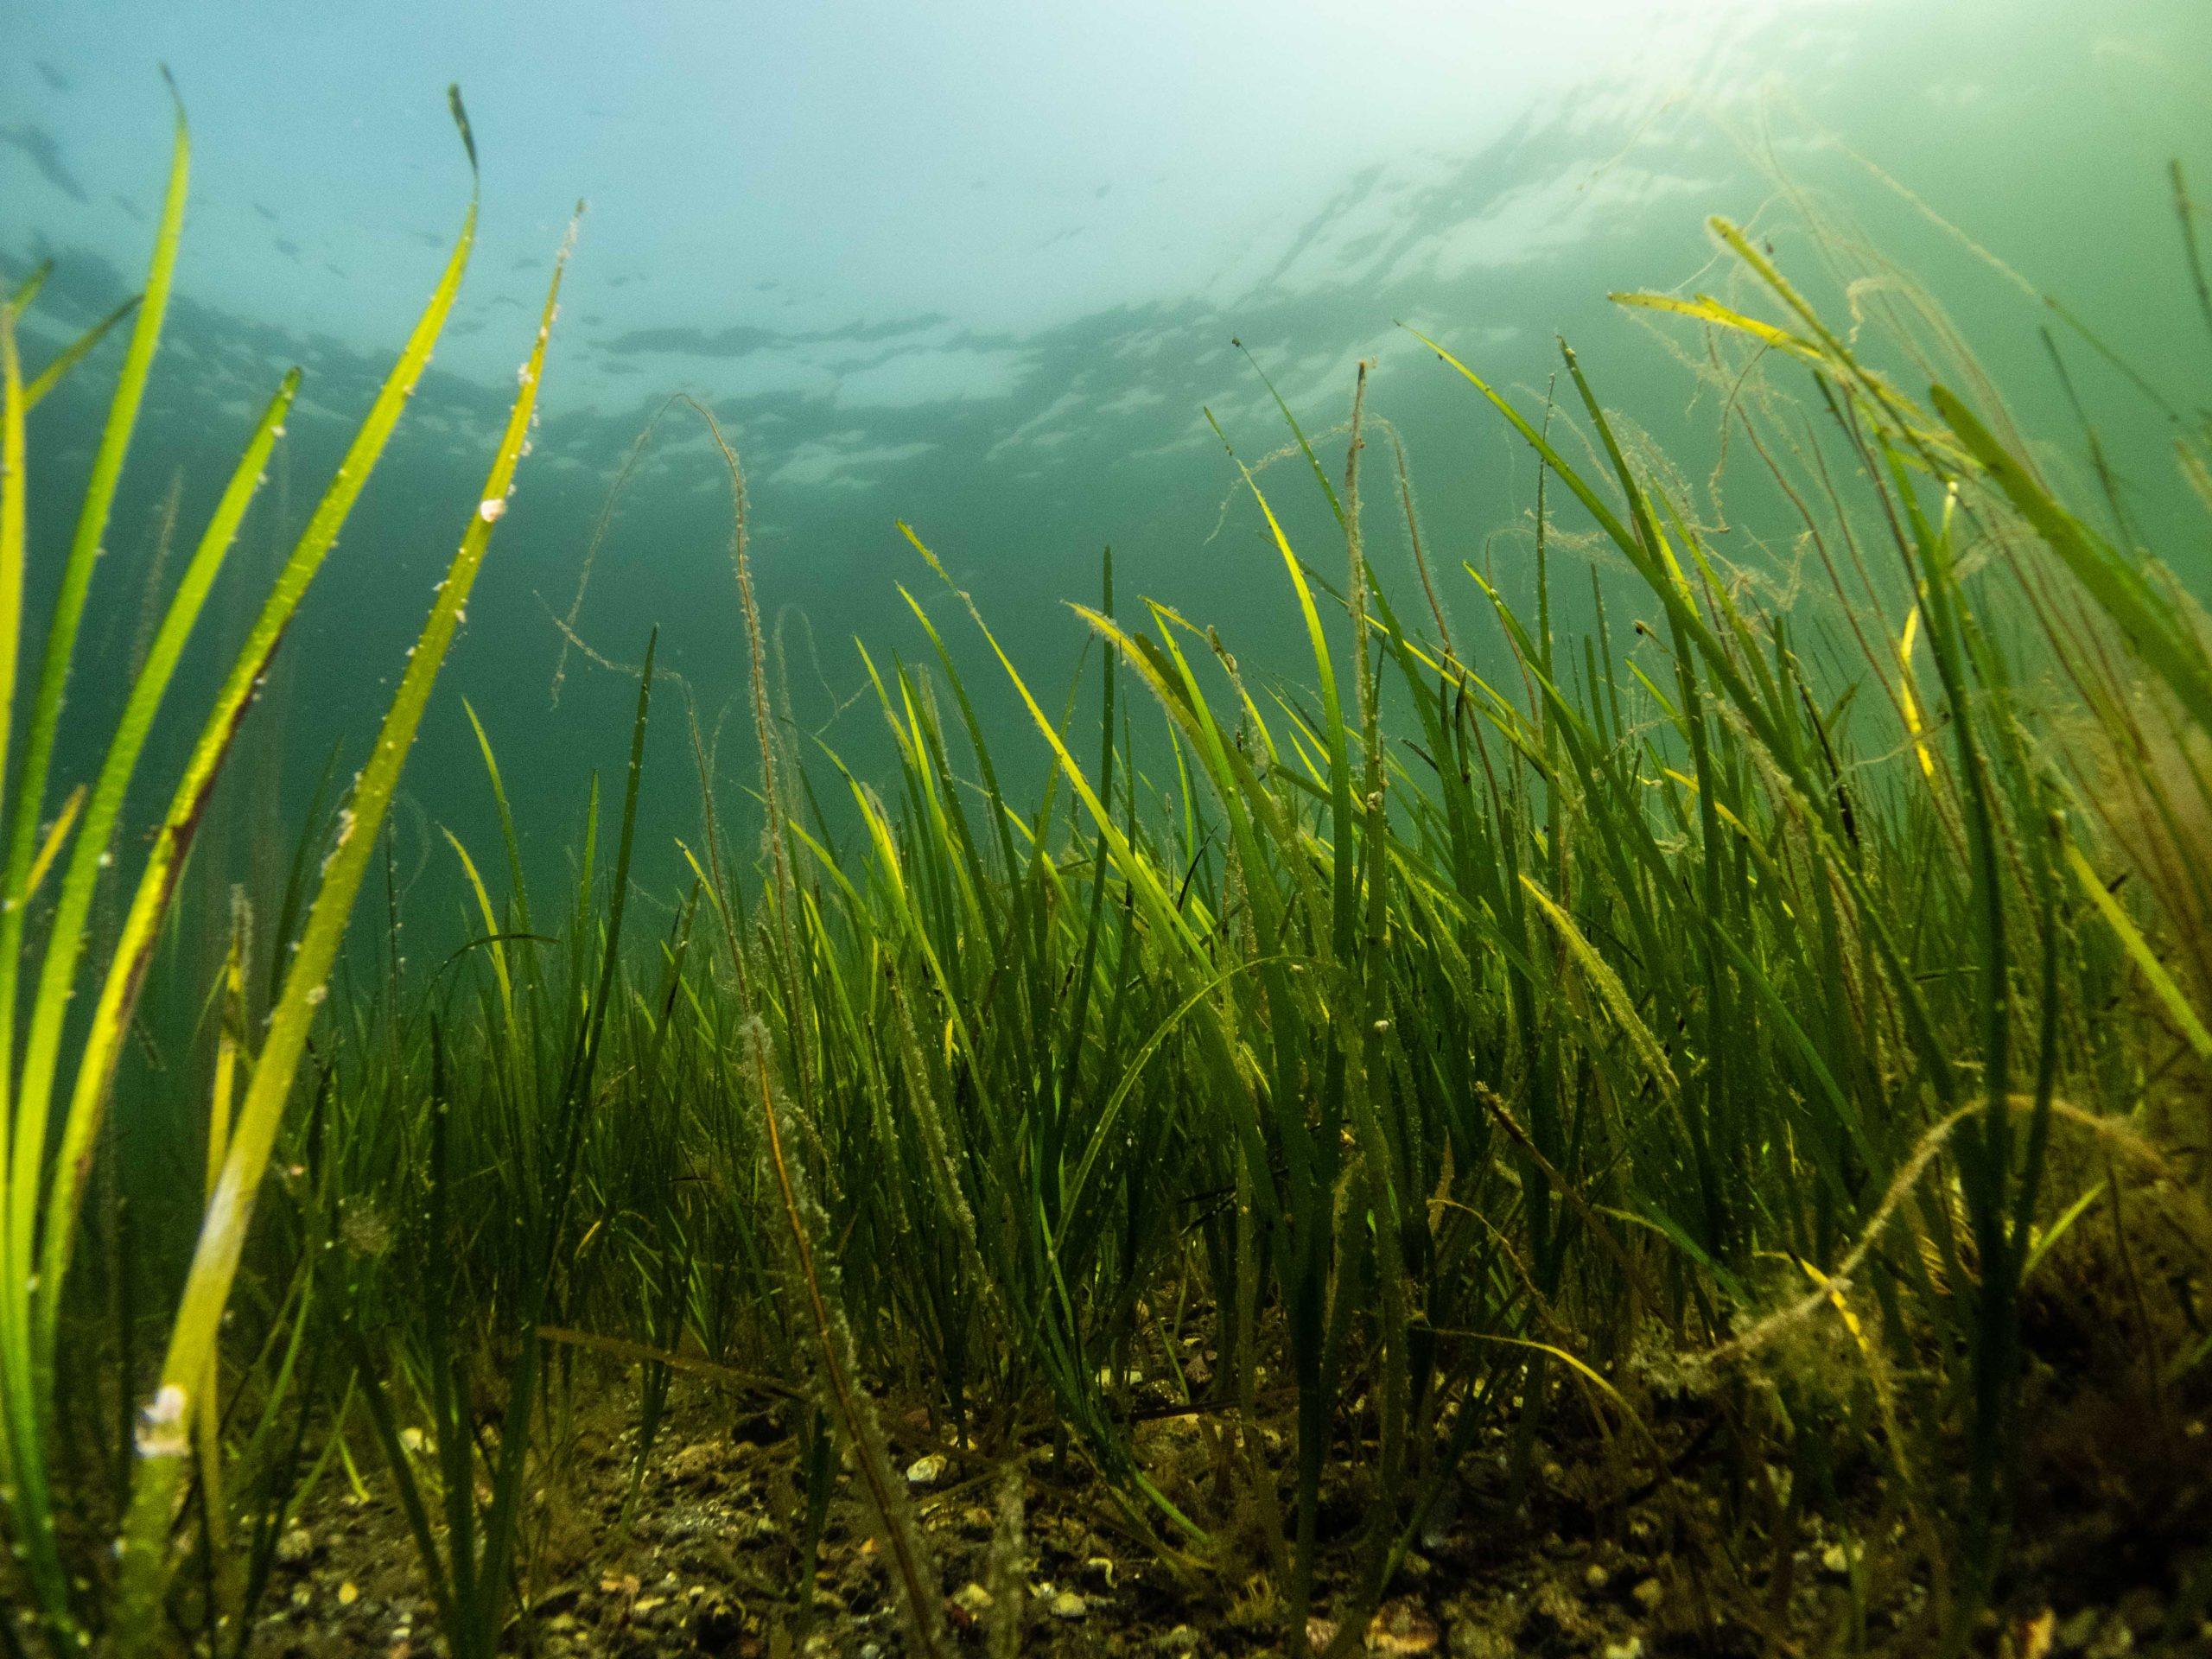 Seagrass can reduce coastal erosion by 70%